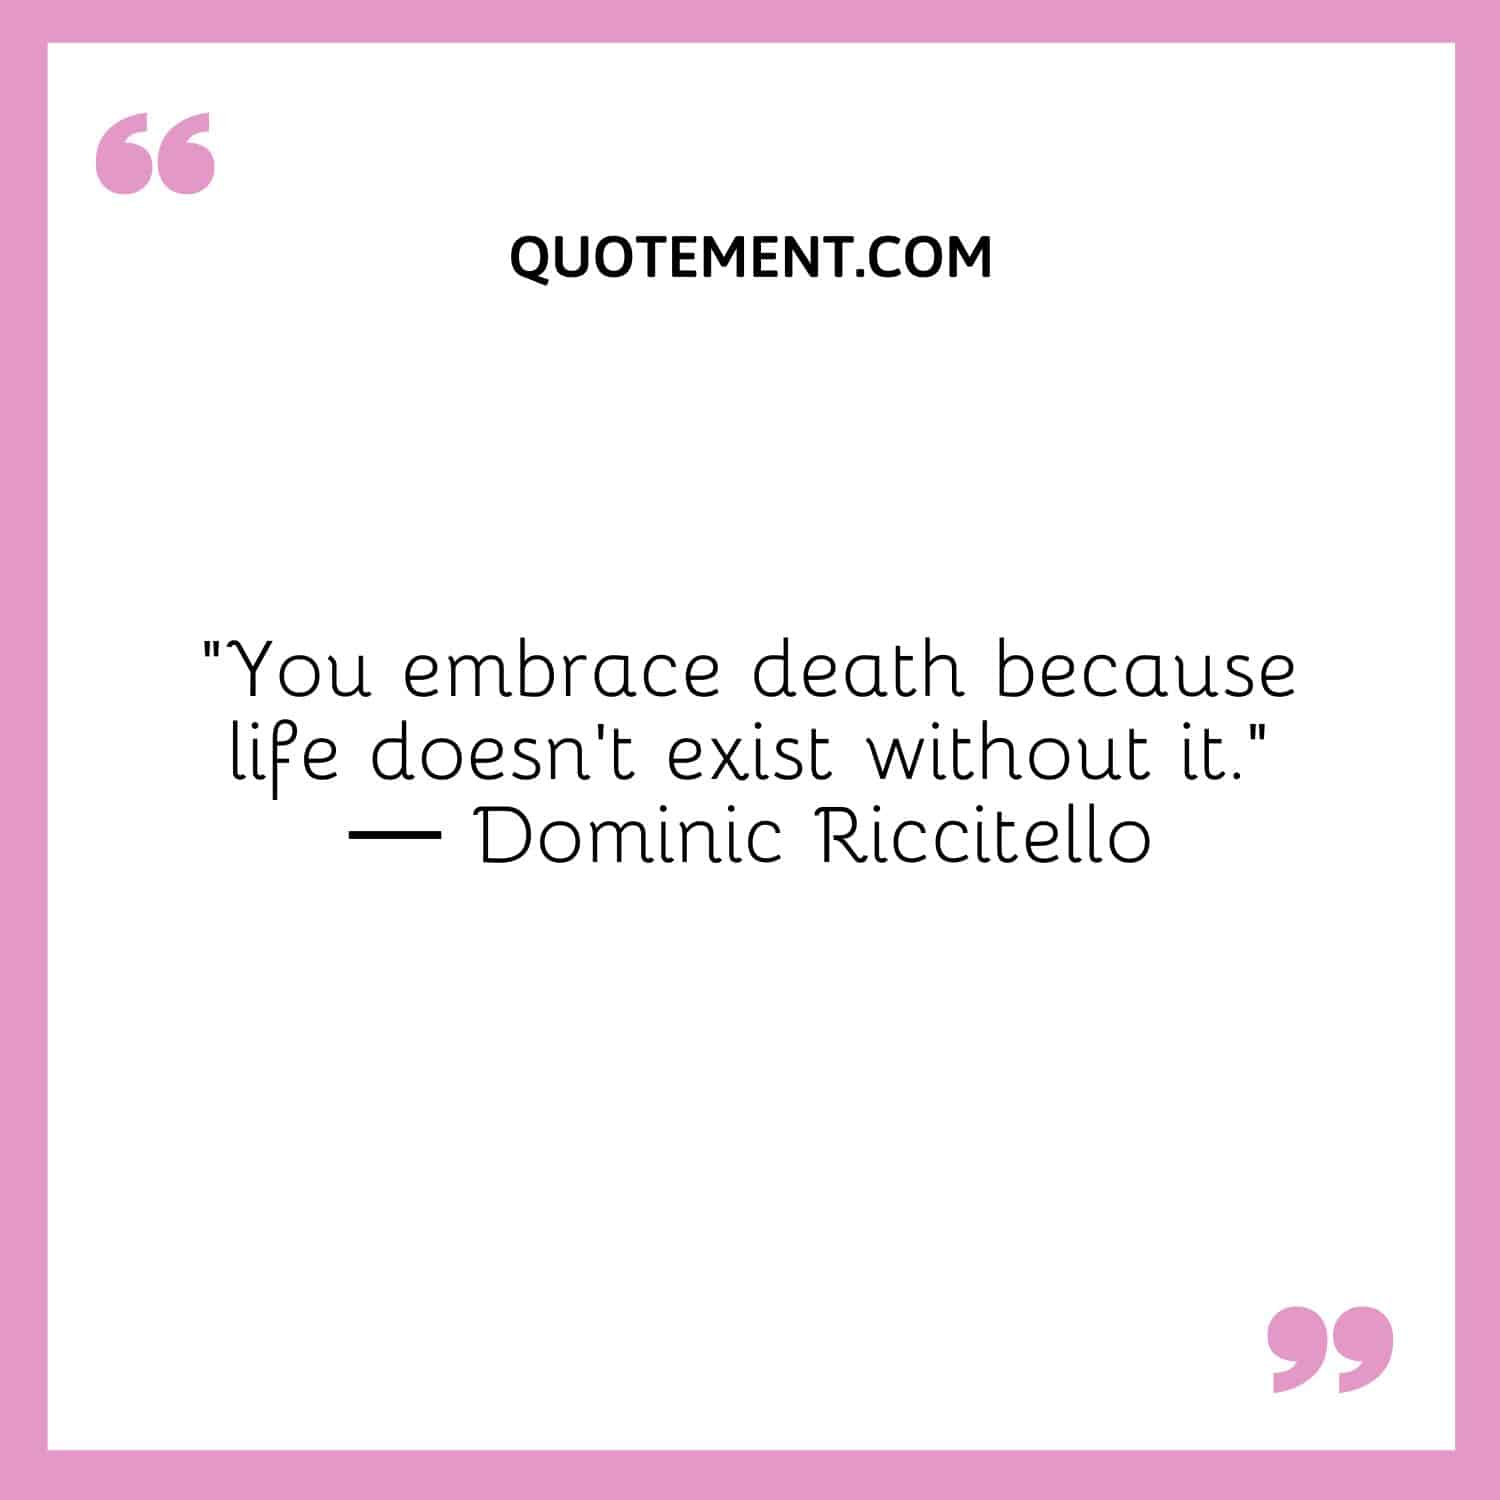 You embrace death because life doesn’t exist without it